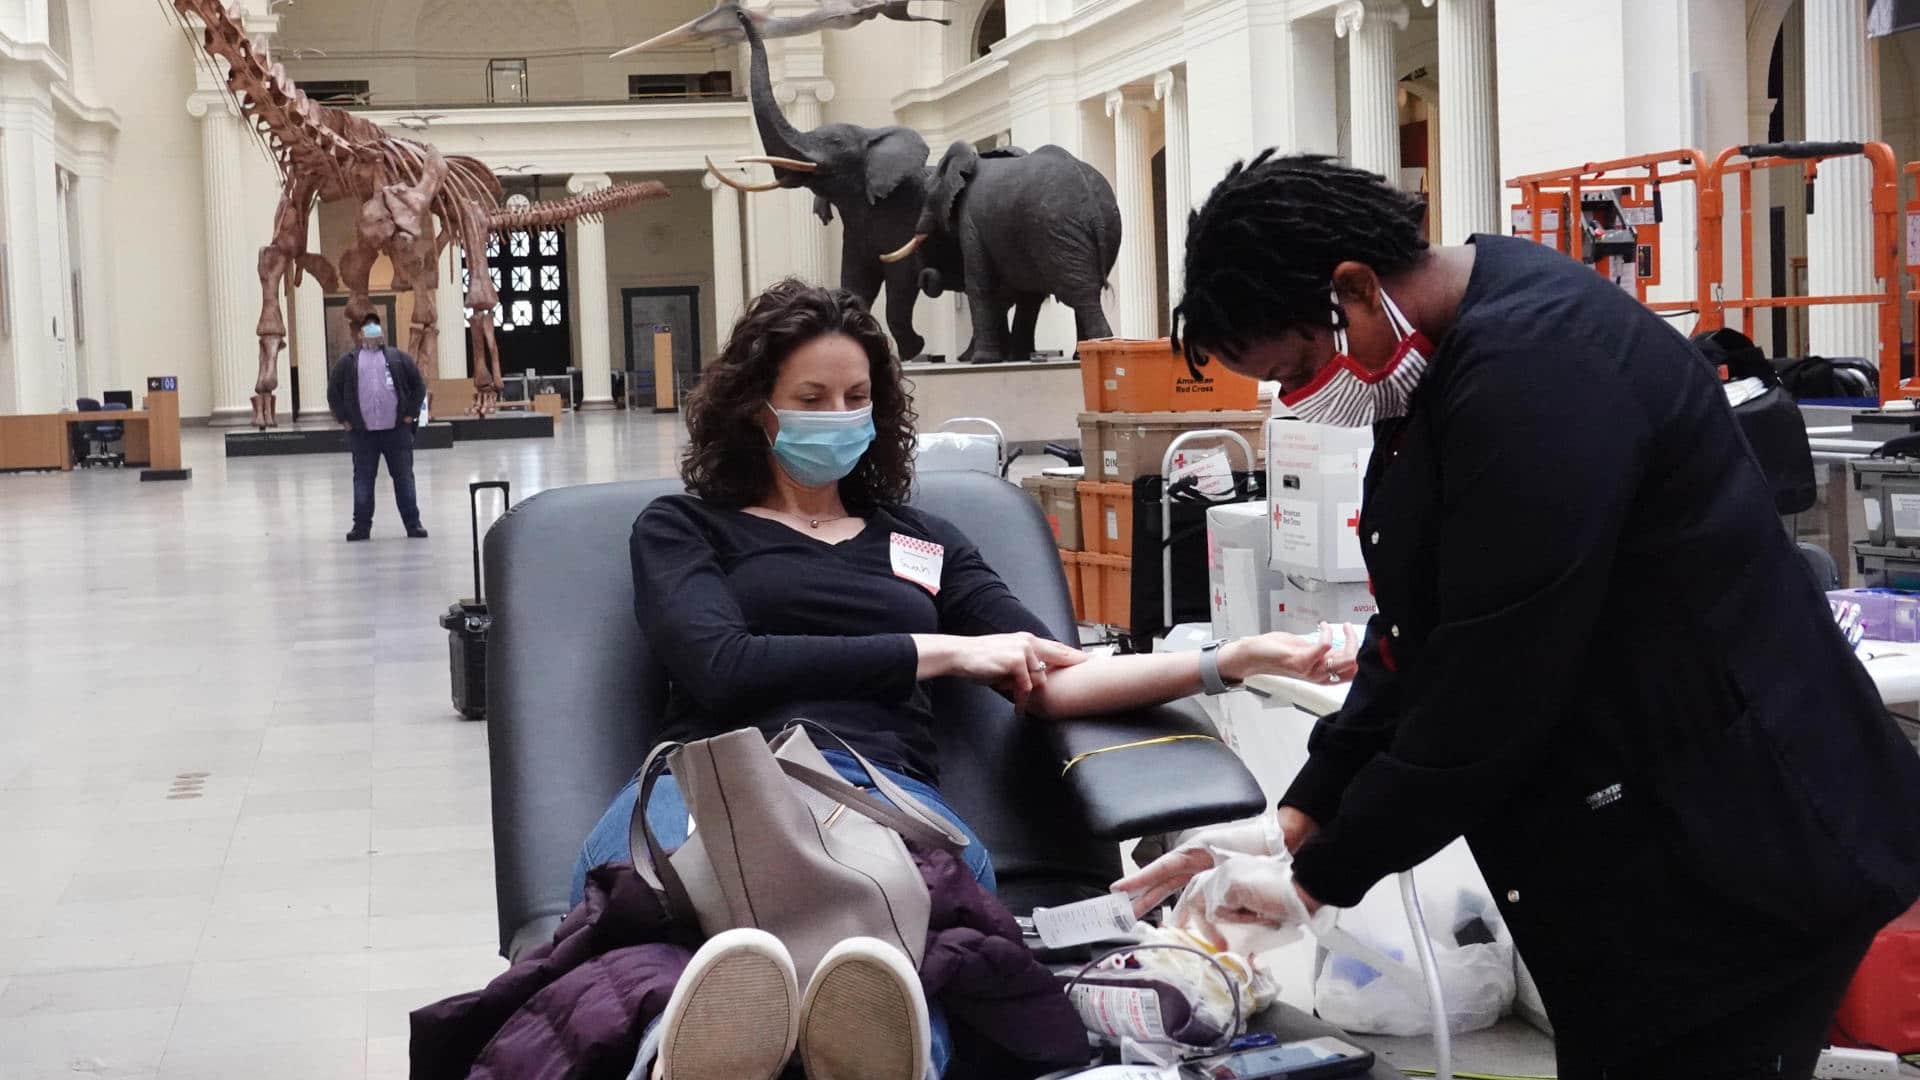 In May, the American Red Cross held a blood drive in the Field Museum of Natural History in Chicago. To maximize distancing, only five to six donors were scheduled to be in the 21,000-square-foot main hall every hour.